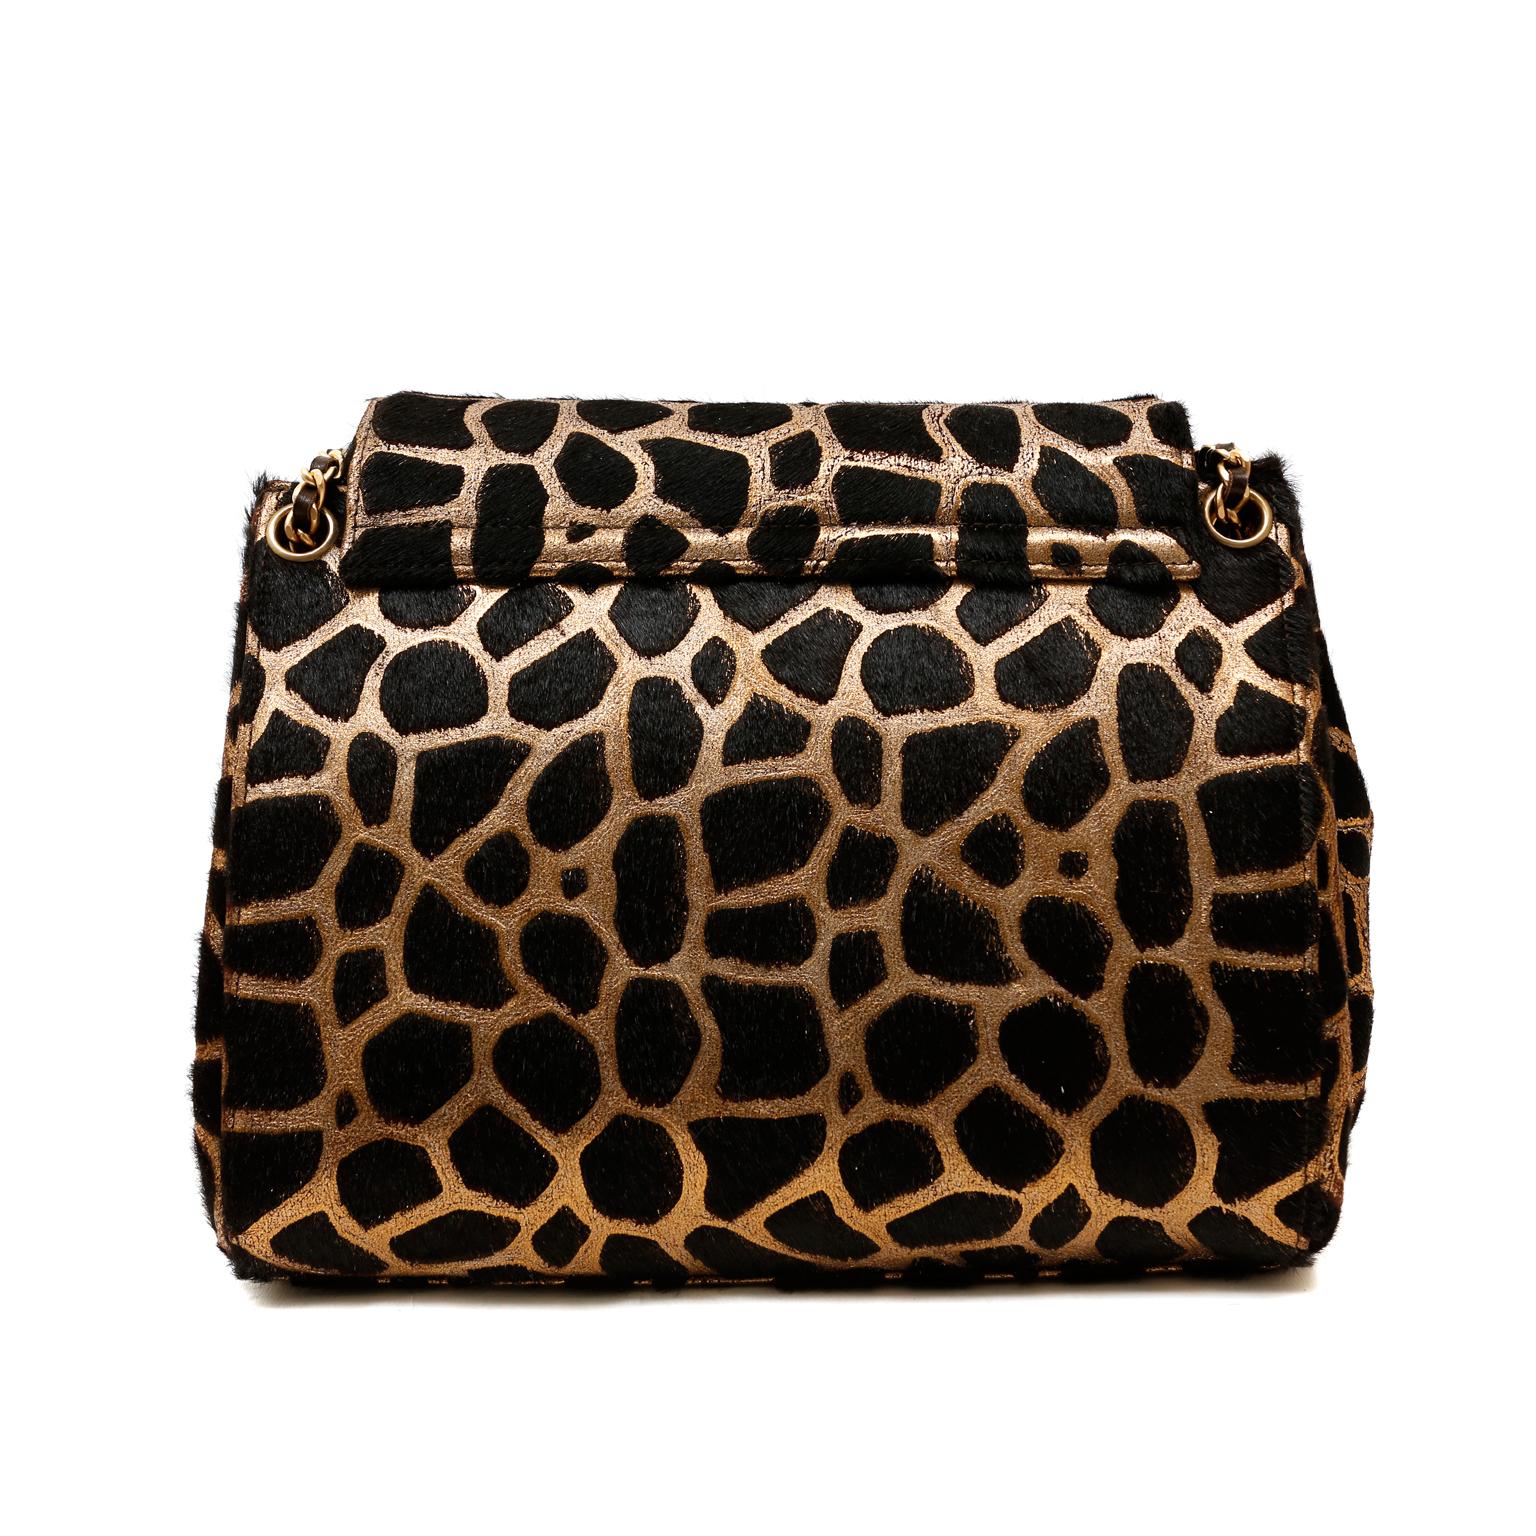 This authentic Chanel Giraffe Calf Hair Flap Bag is in pristine condition.  The limited-edition piece is from a runway show in Paris.  We also have the matching shoes and skirt available in our boutique.  This listing is for the bag only.  
Black